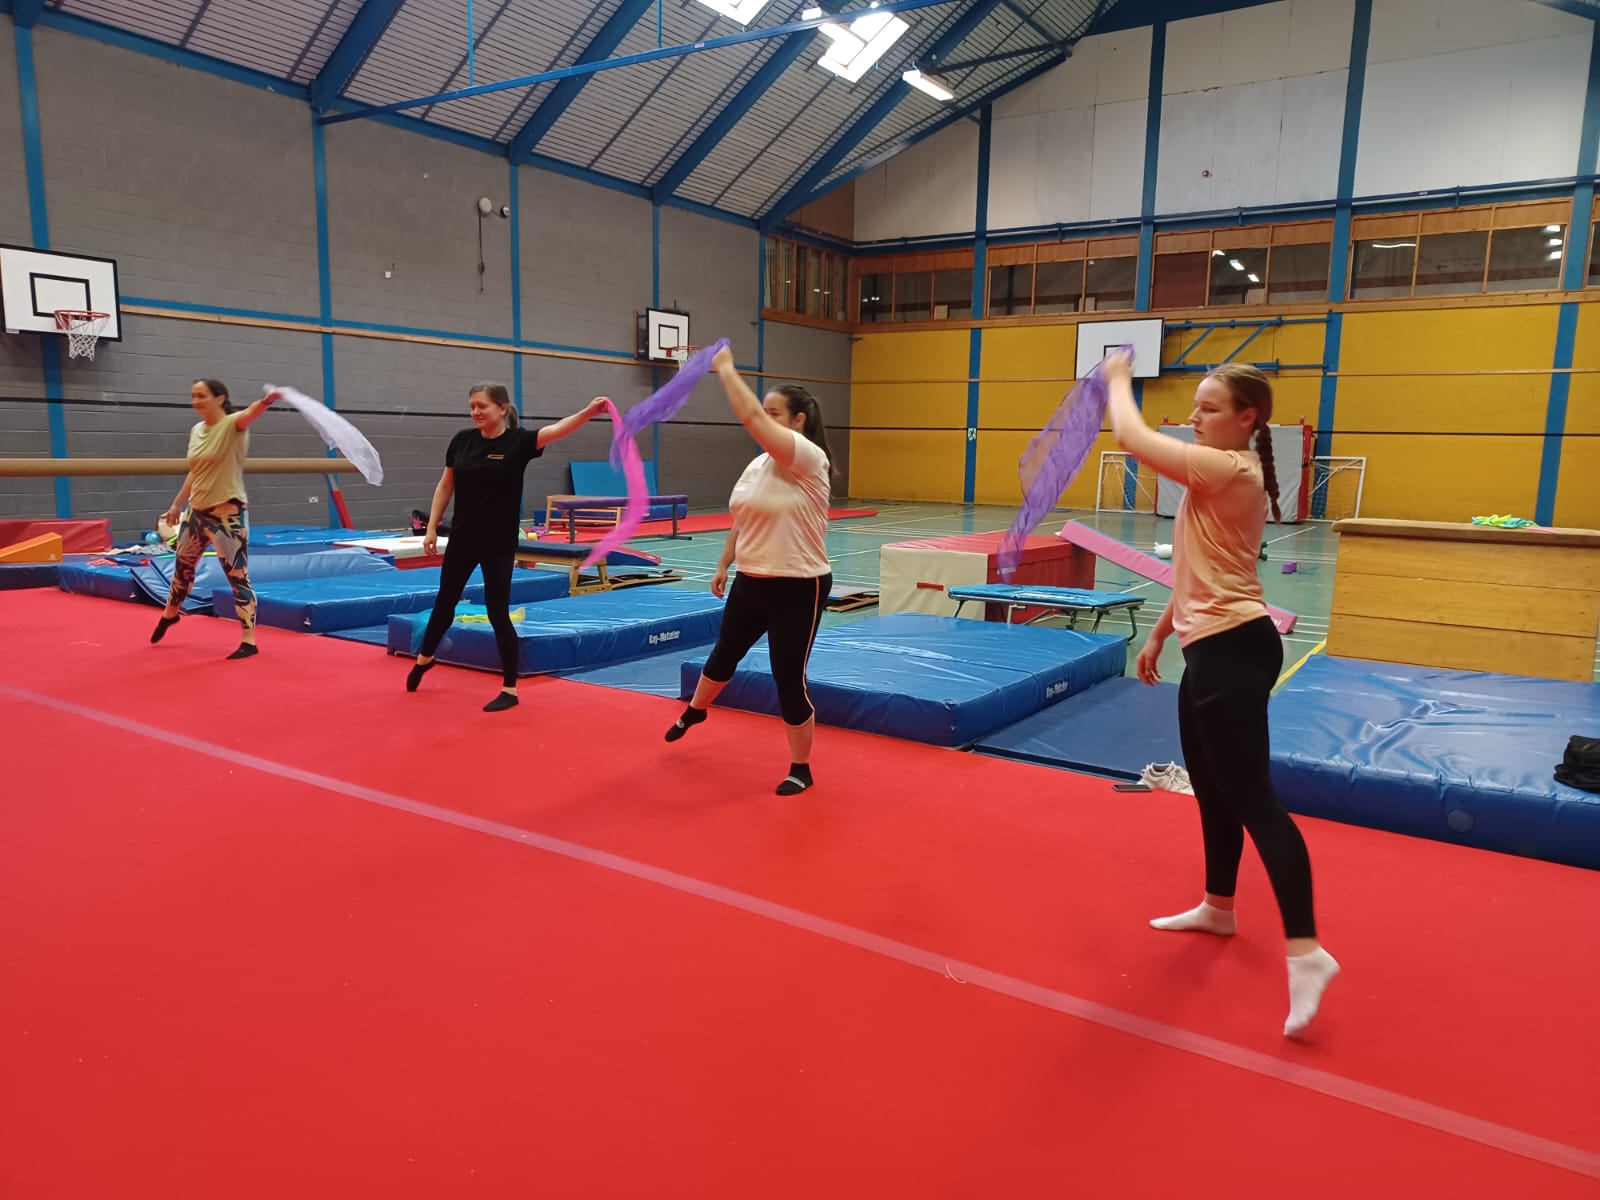 People learning simple skills on a gymnastics activity instructor course